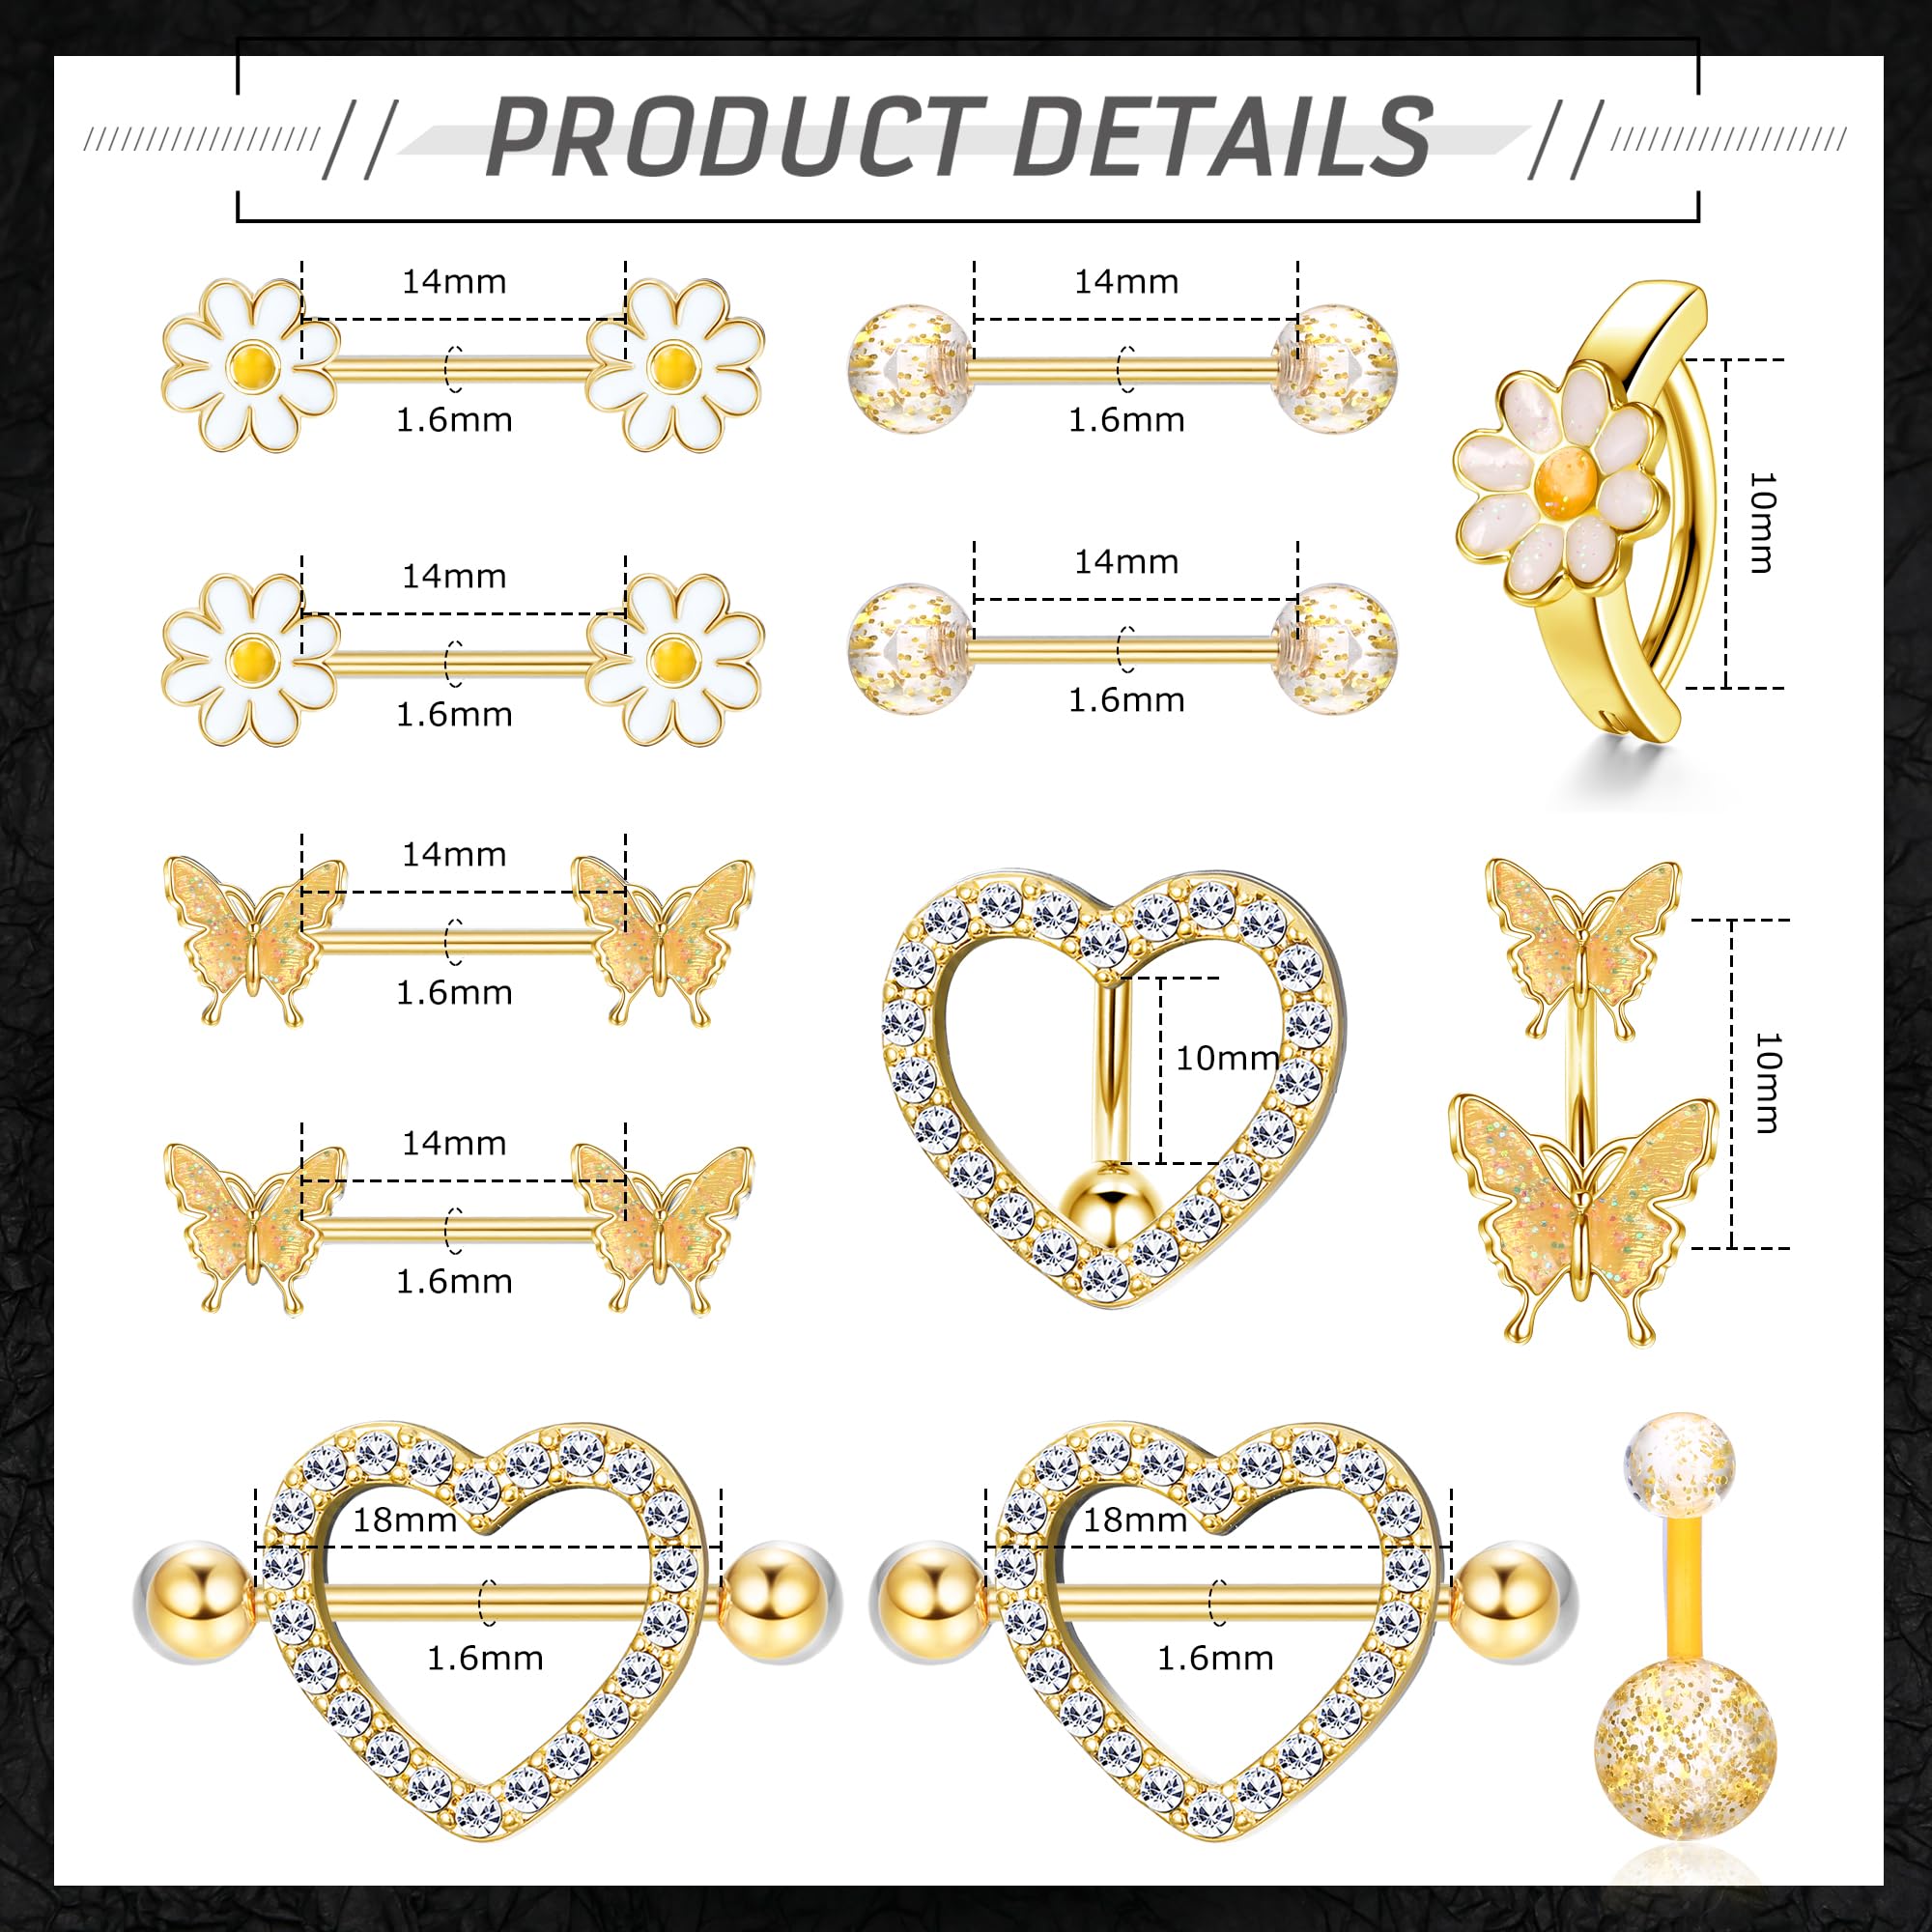 ORAZIO 14G Nipple Rings for Women Surgical Steel Belly Button Ring Butterfly Daisy Flower Nipple Barbells CZ Heart Curved Navel Rings 12 PCS Nipple Piercings Jewelry Set-GOLD